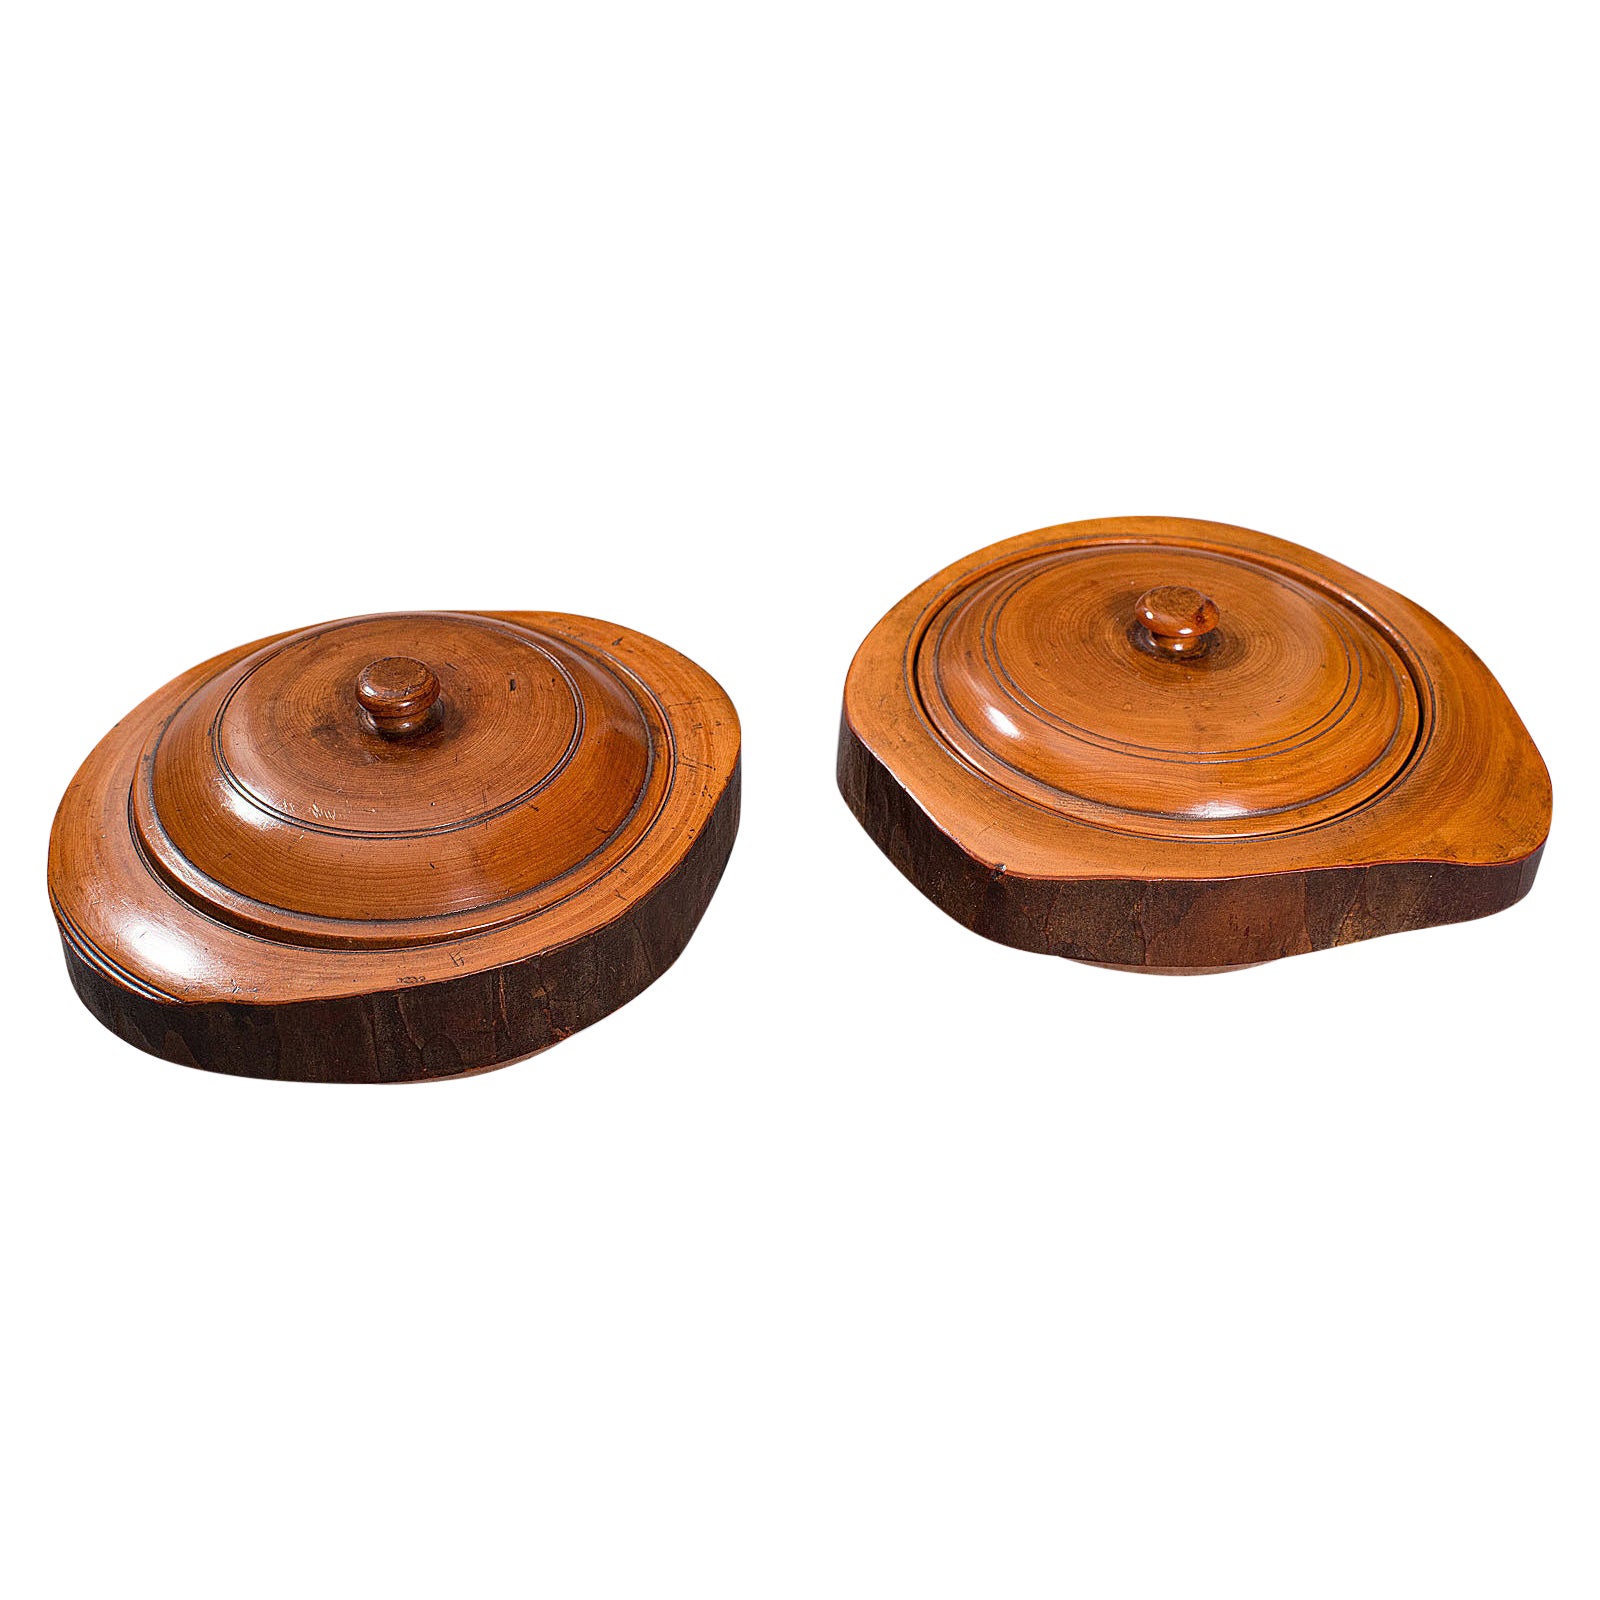 Pair of Antique Carved Lidded Bowls, Treen, English, Yew, Victorian, circa 1900 For Sale